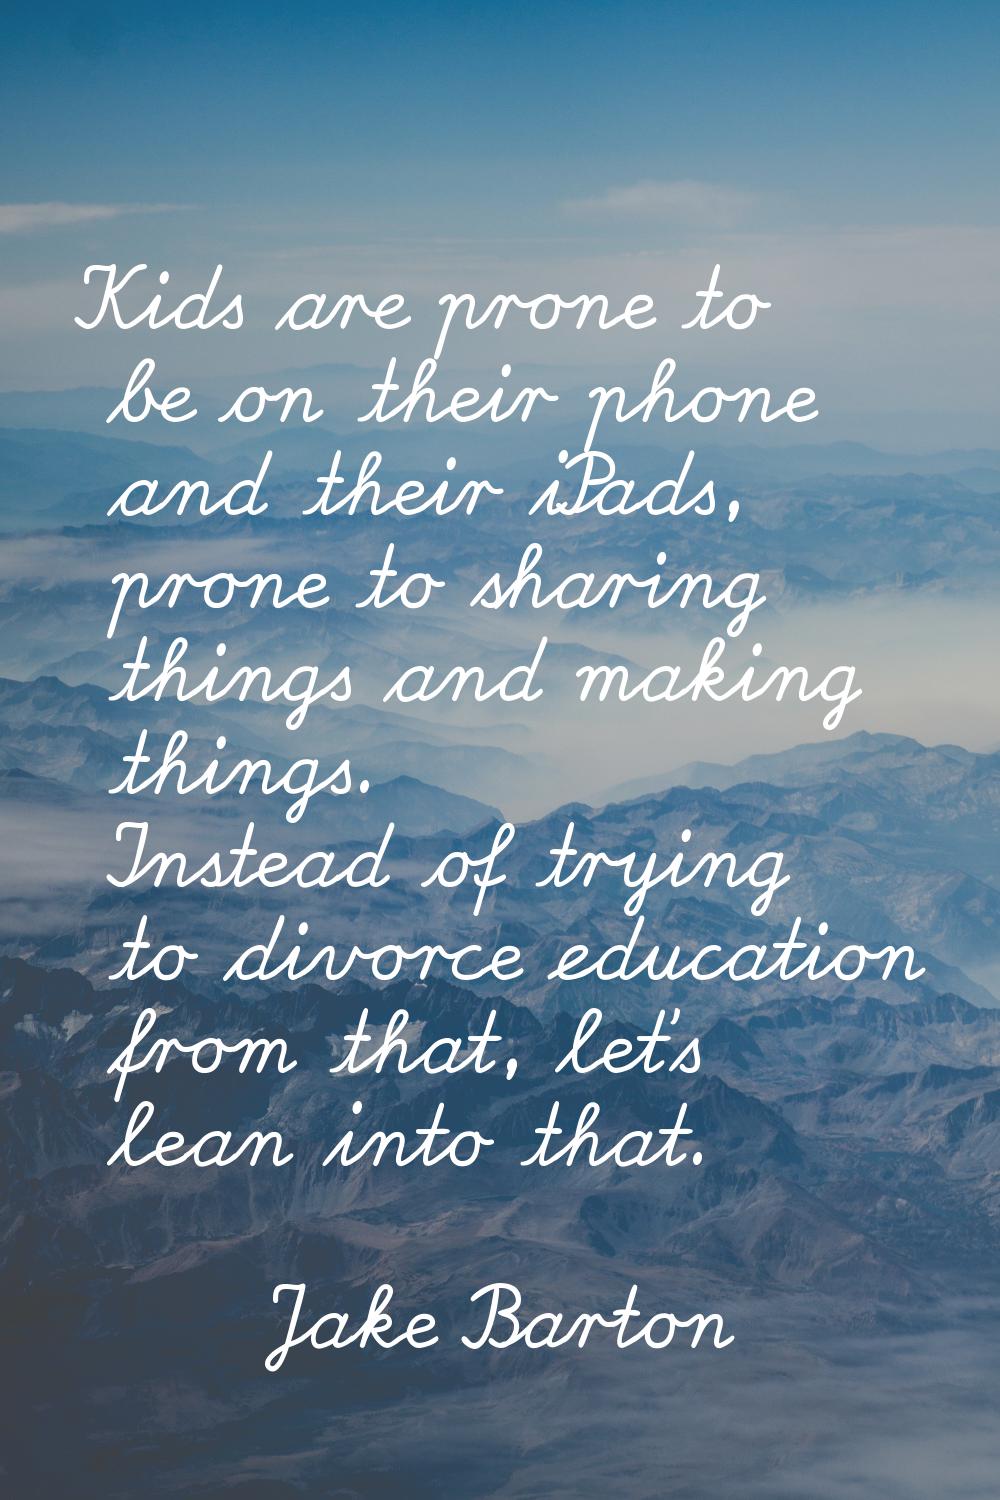 Kids are prone to be on their phone and their iPads, prone to sharing things and making things. Ins